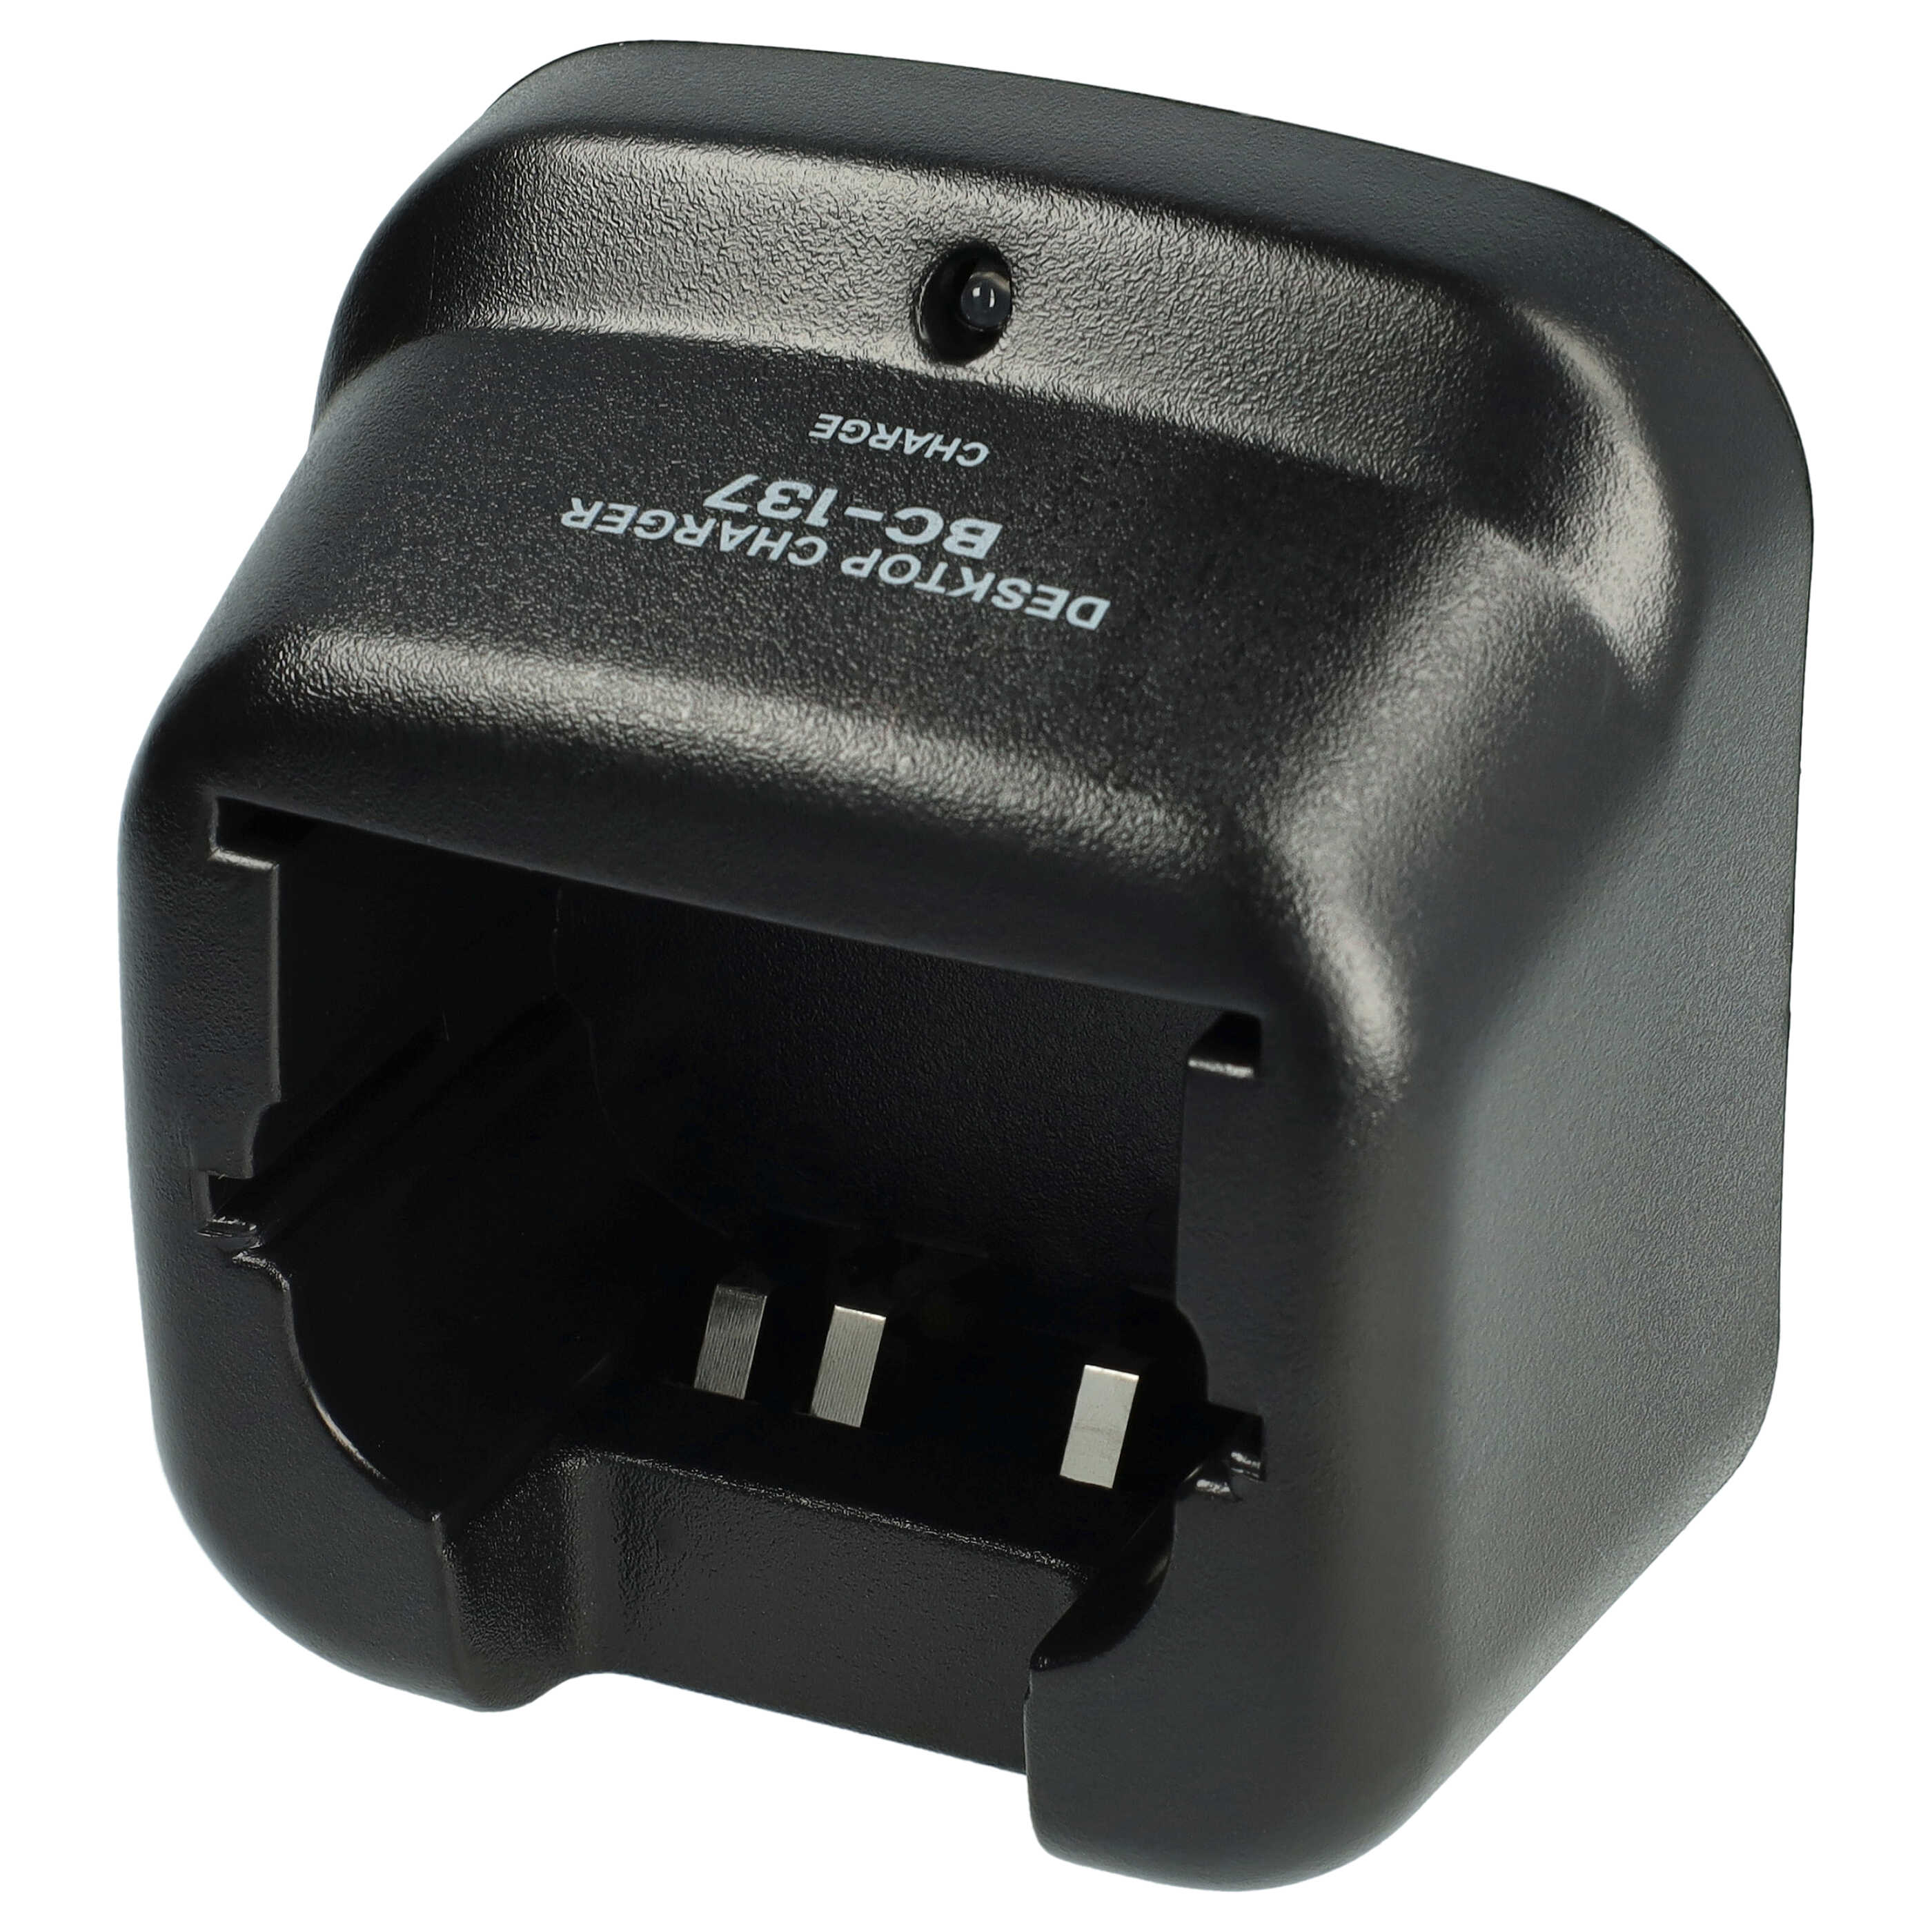 Charger + Mains Adapter Suitable for IC-A24 Radio Batteries - 12.0 V, 0.35 A